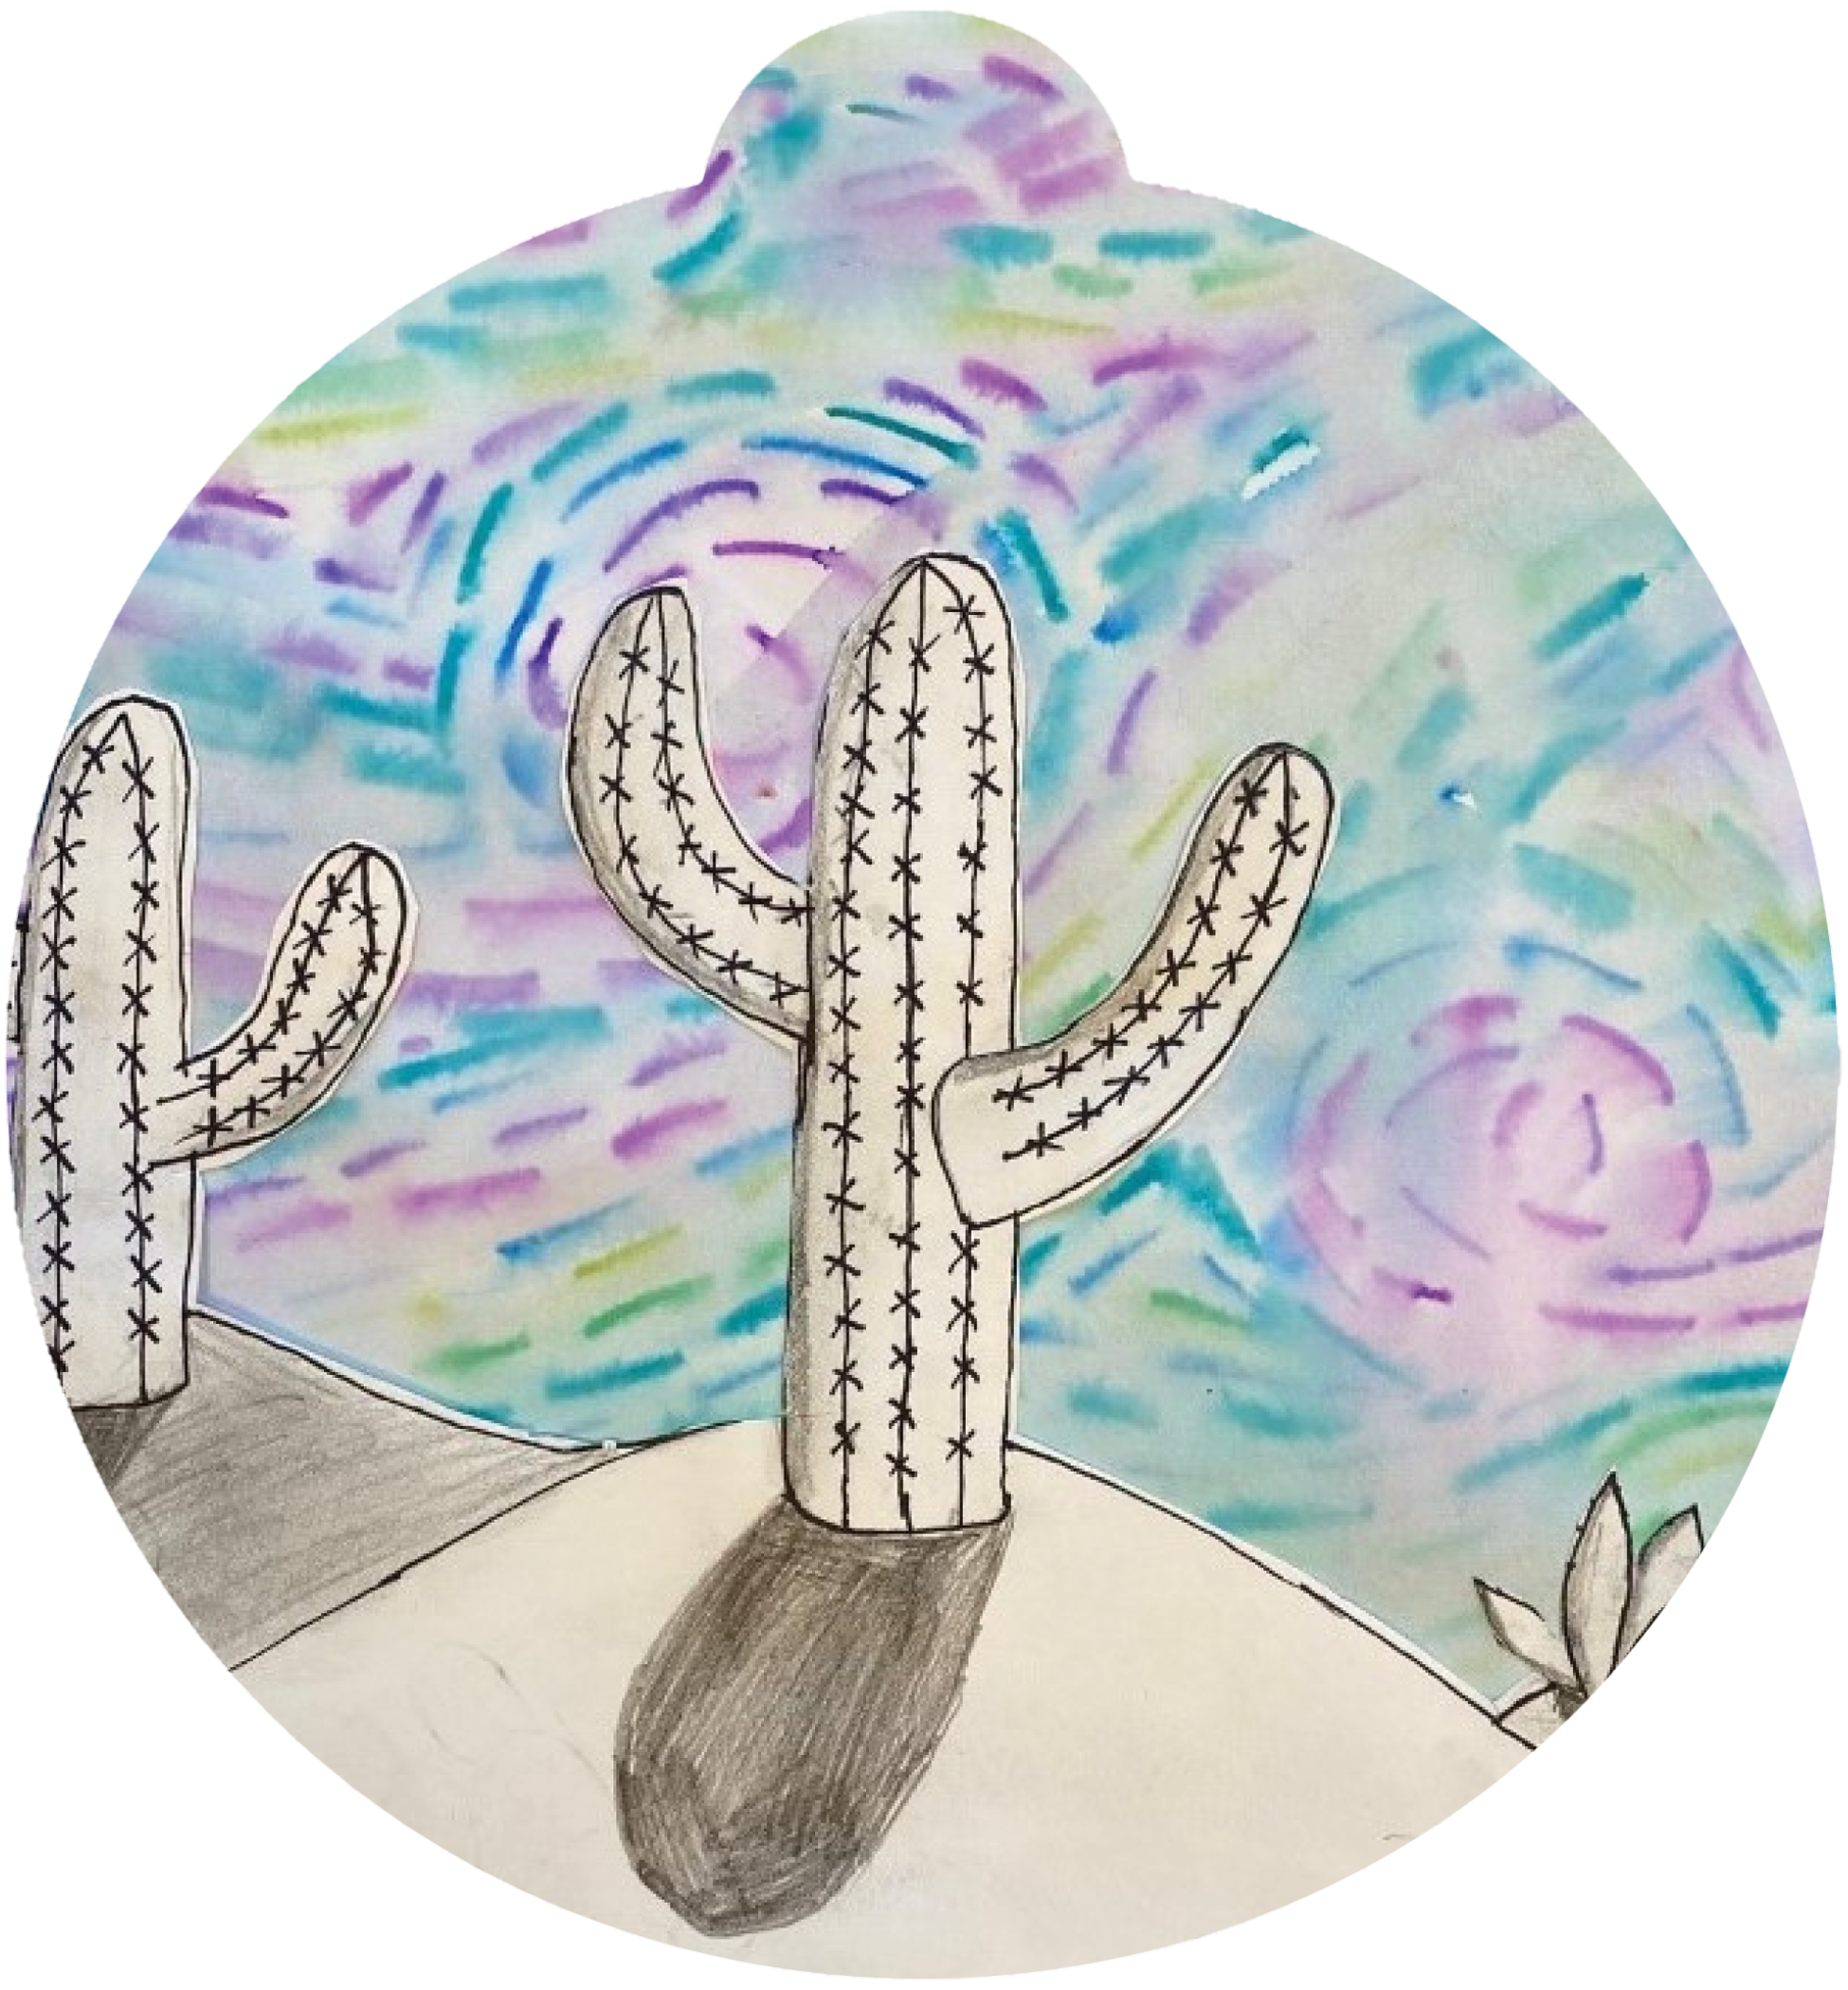 ornament depicting cacti in greyscale, against a swirling sky of blues and purples